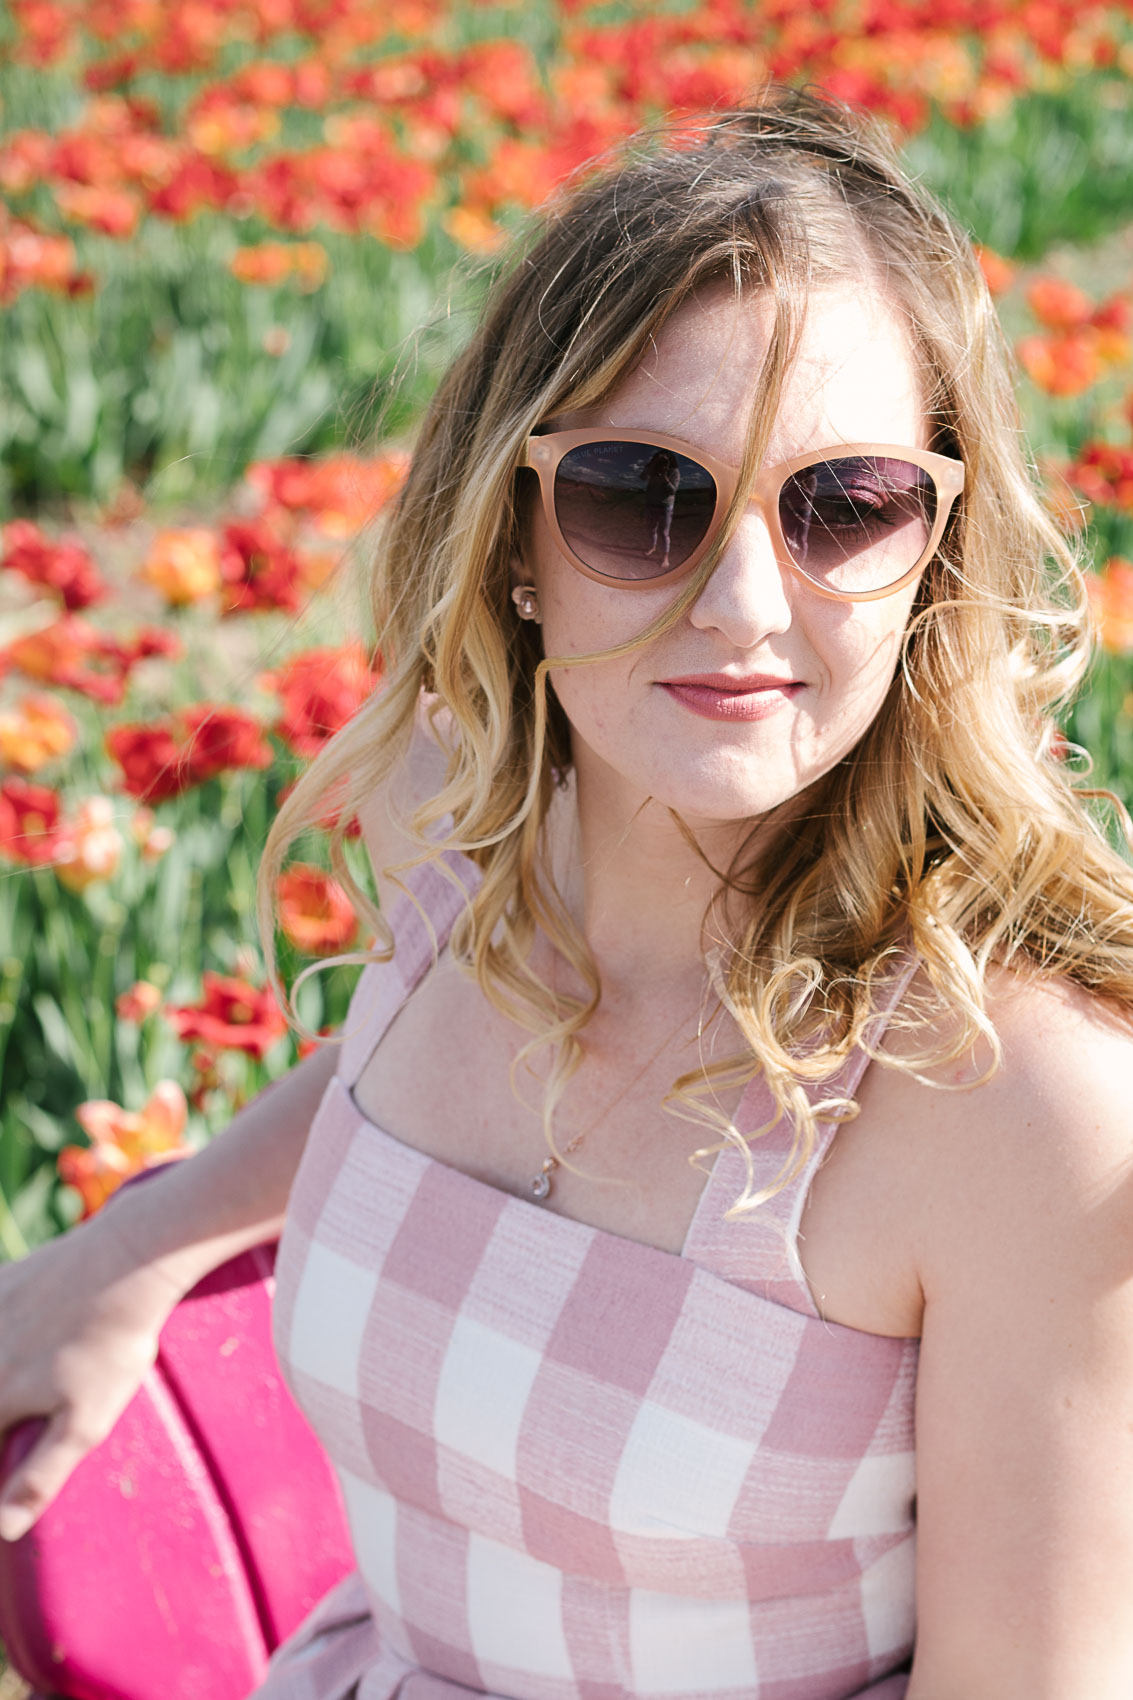 Flower picking in a pink Gal Meets Glam Collection pink gingham dress at Burnside Farms in Nokesville, Virginia | pictures of tulips